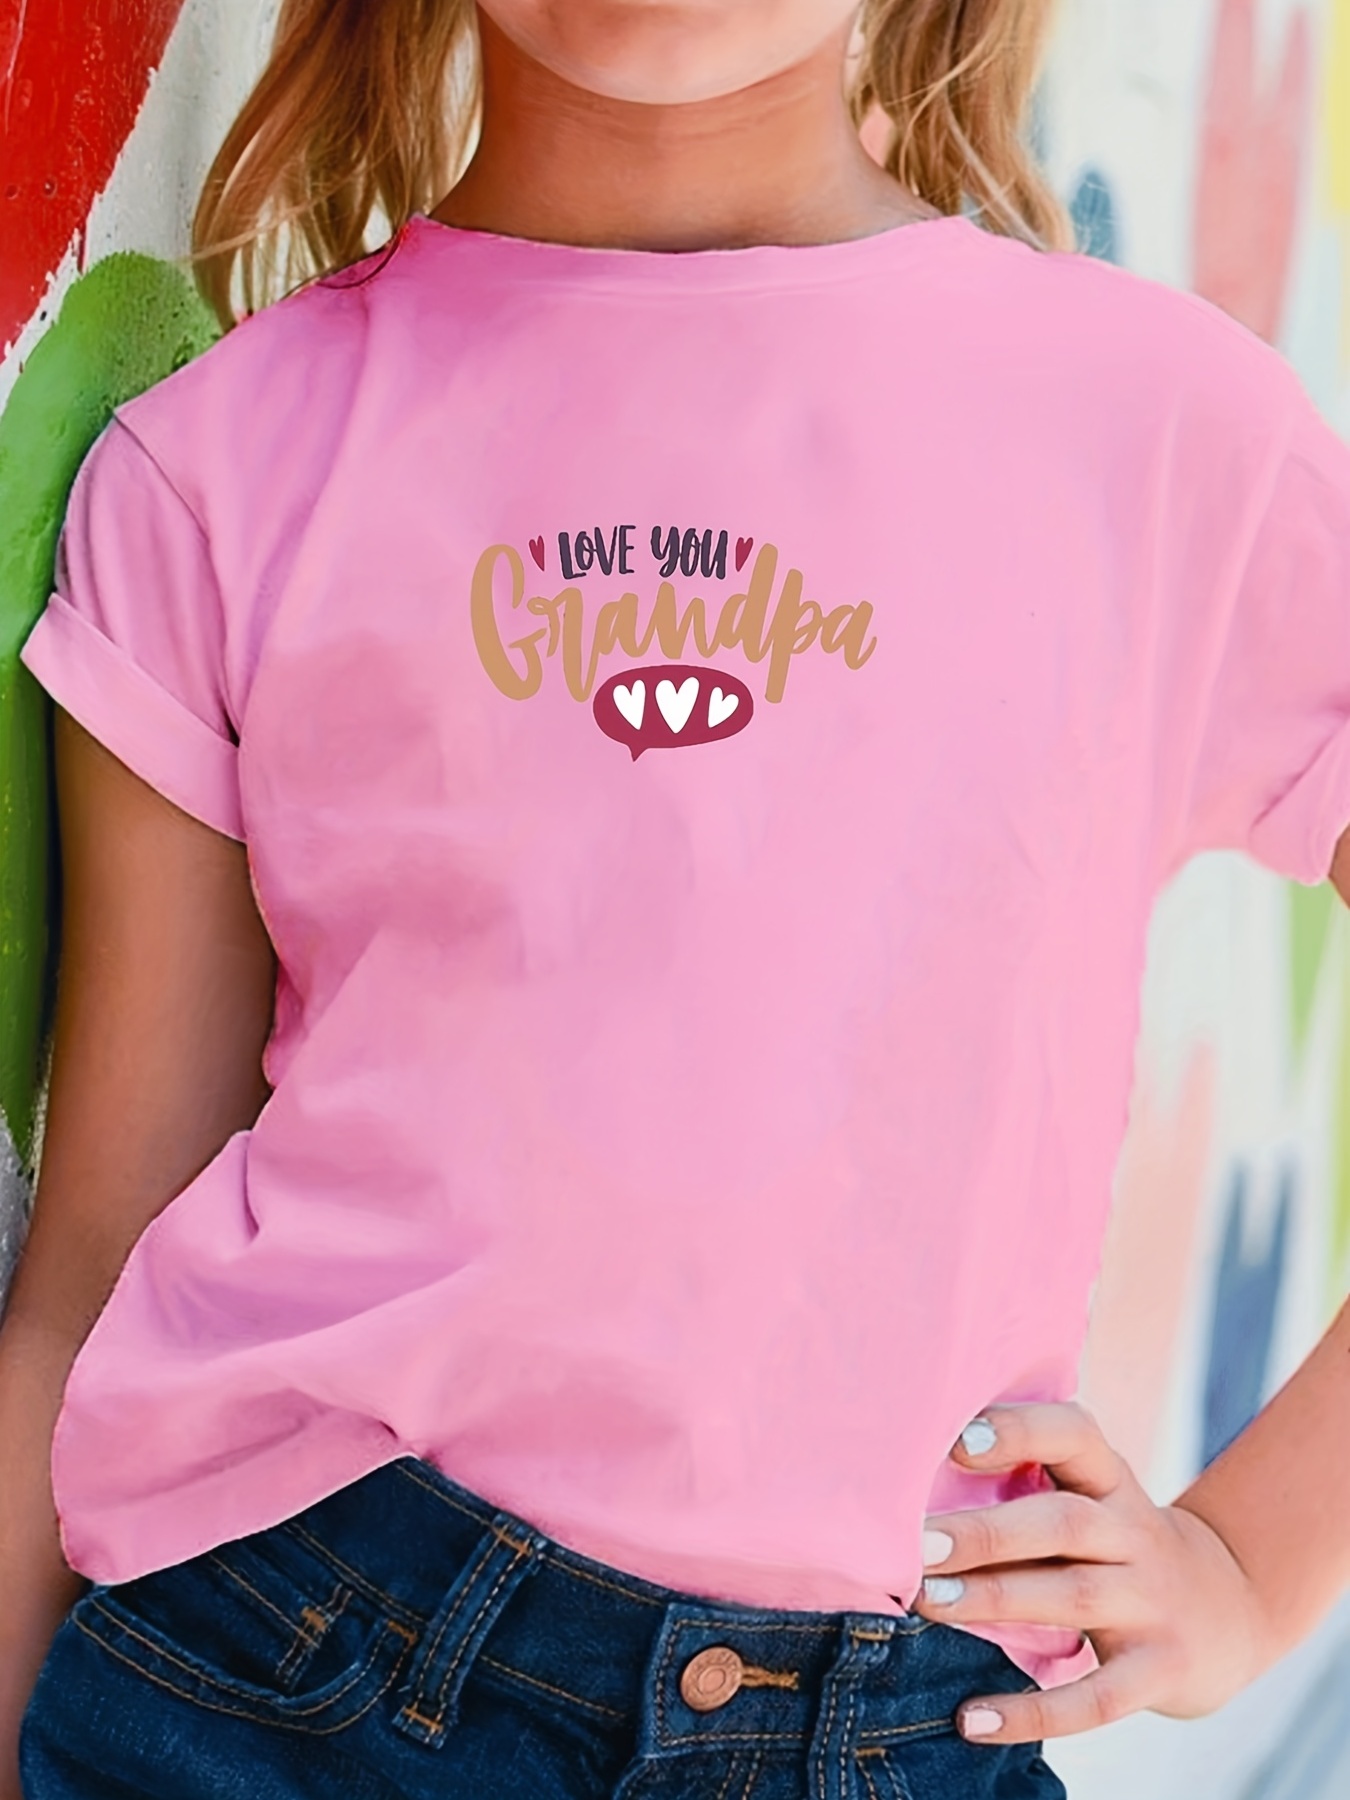 Kids Clothing - Brand Love Graphic Tee - Pink